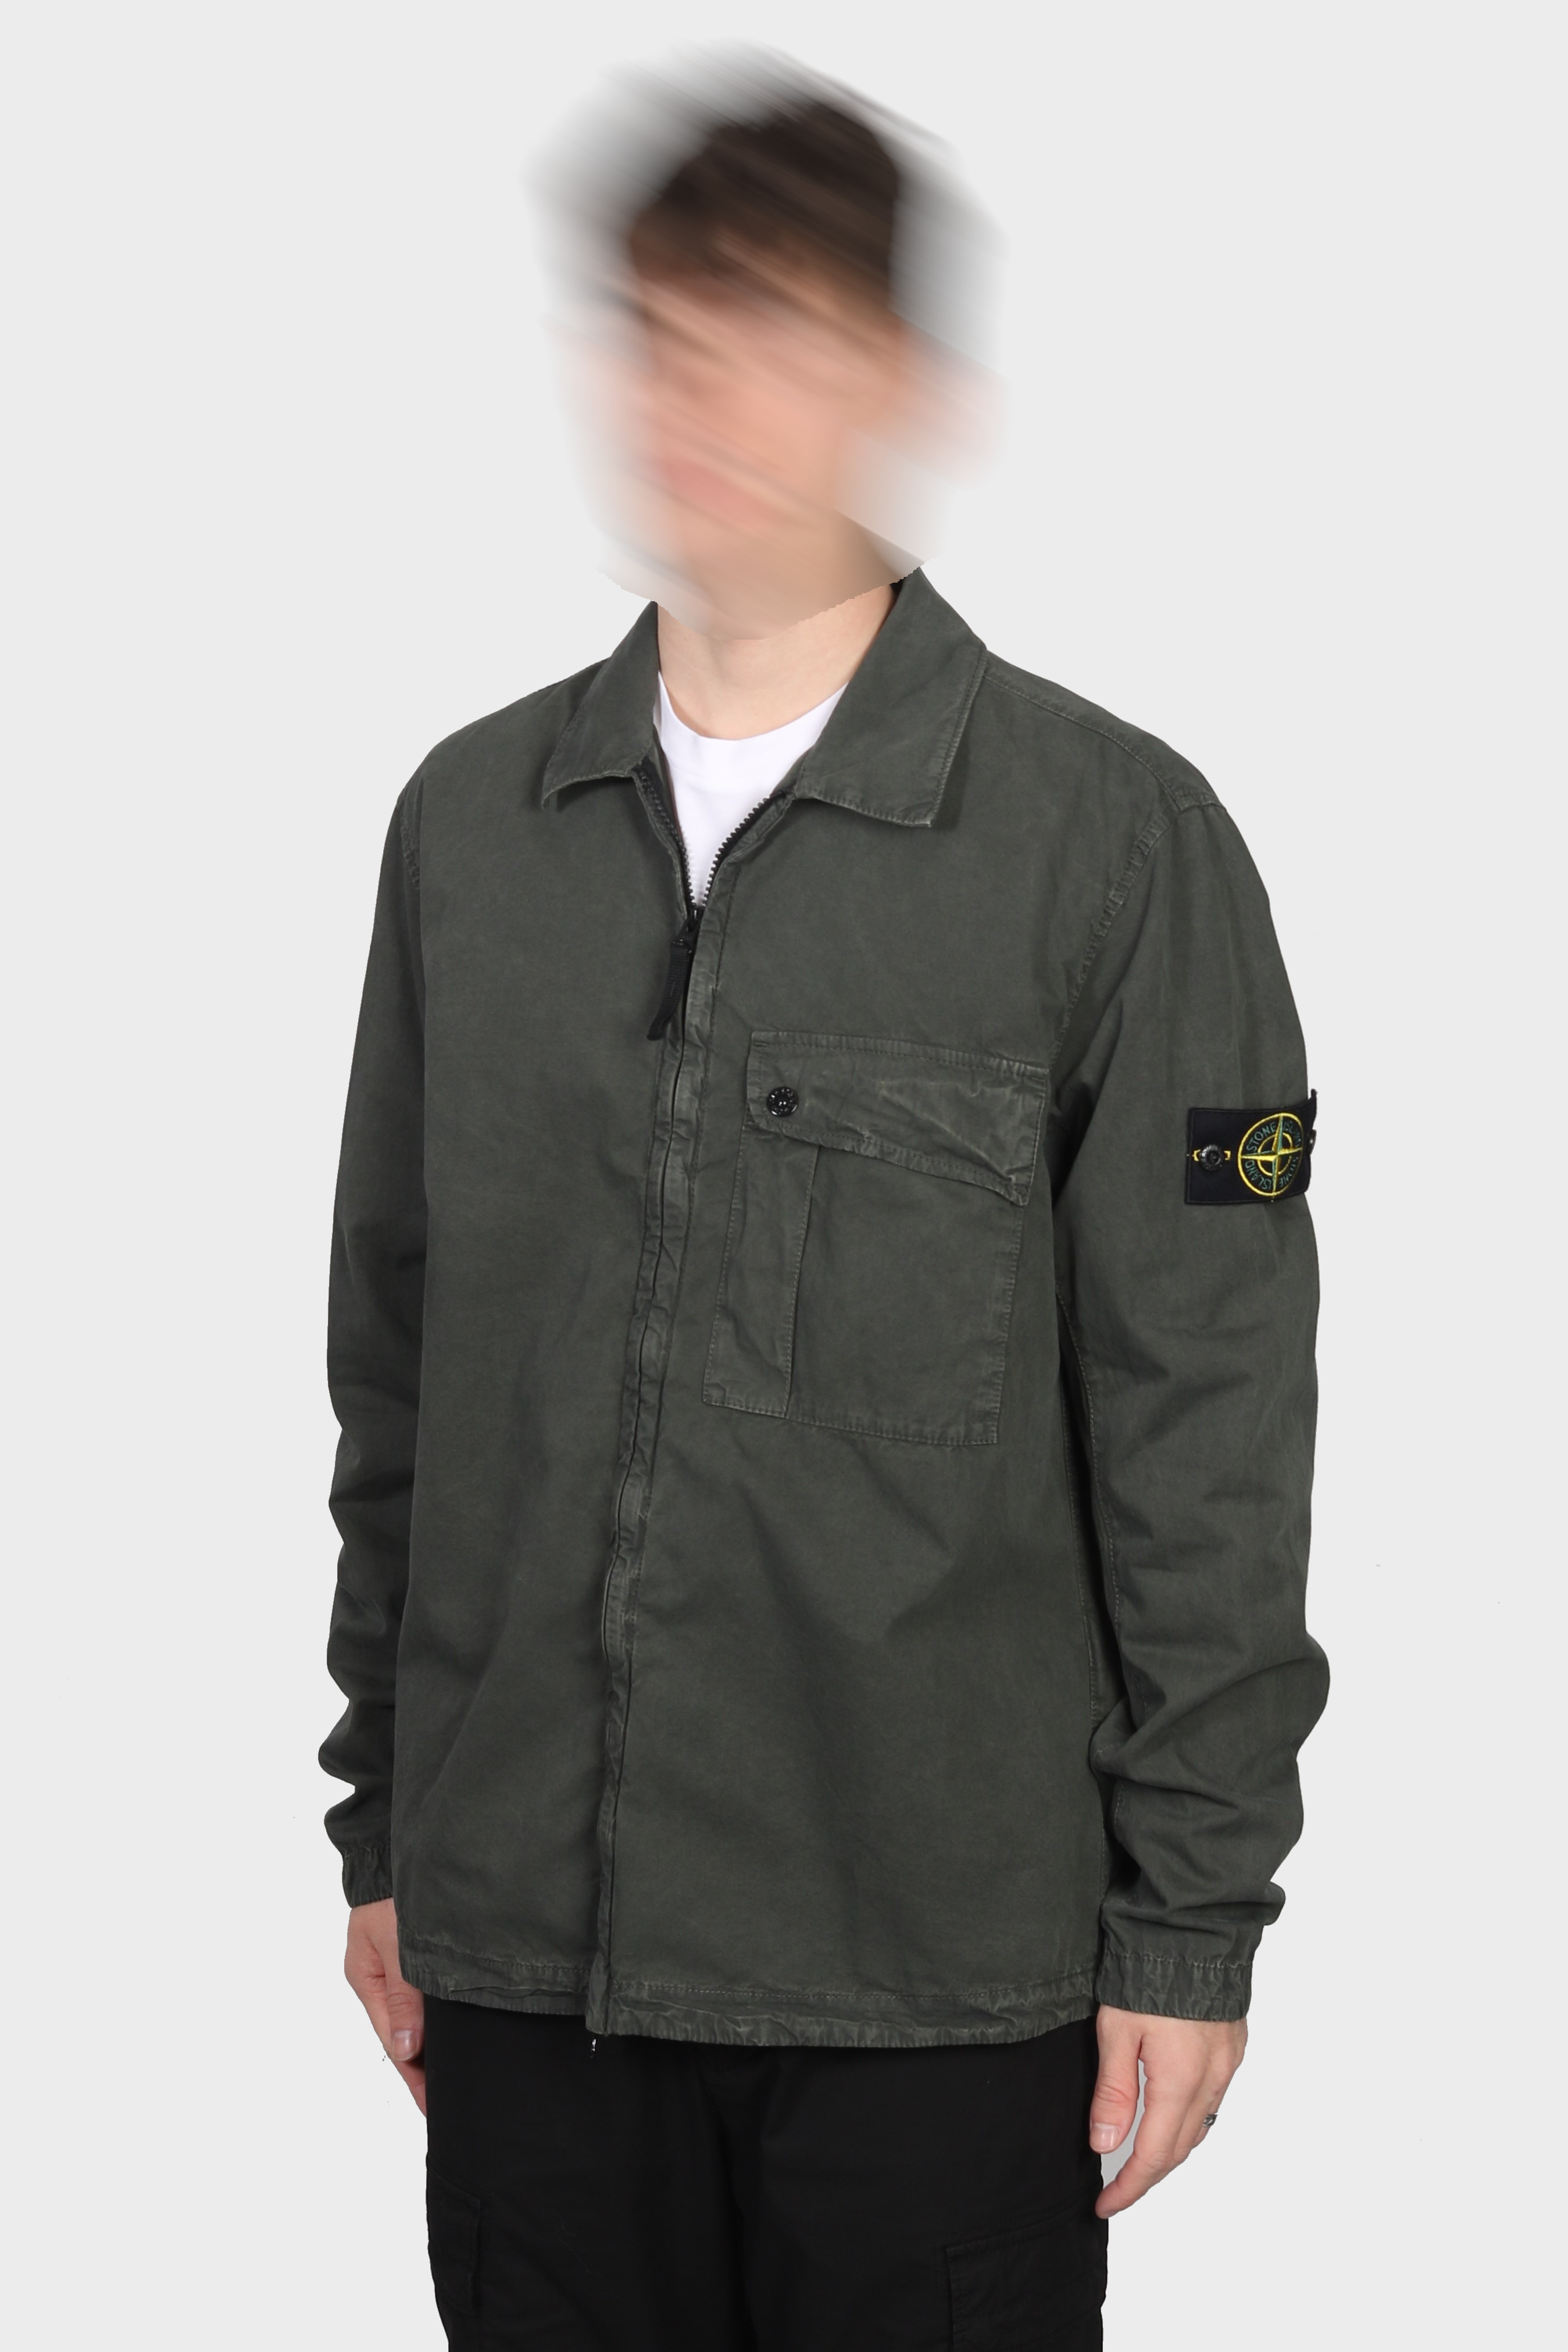 STONE ISLAND Overshirt in Washed Green 3XL